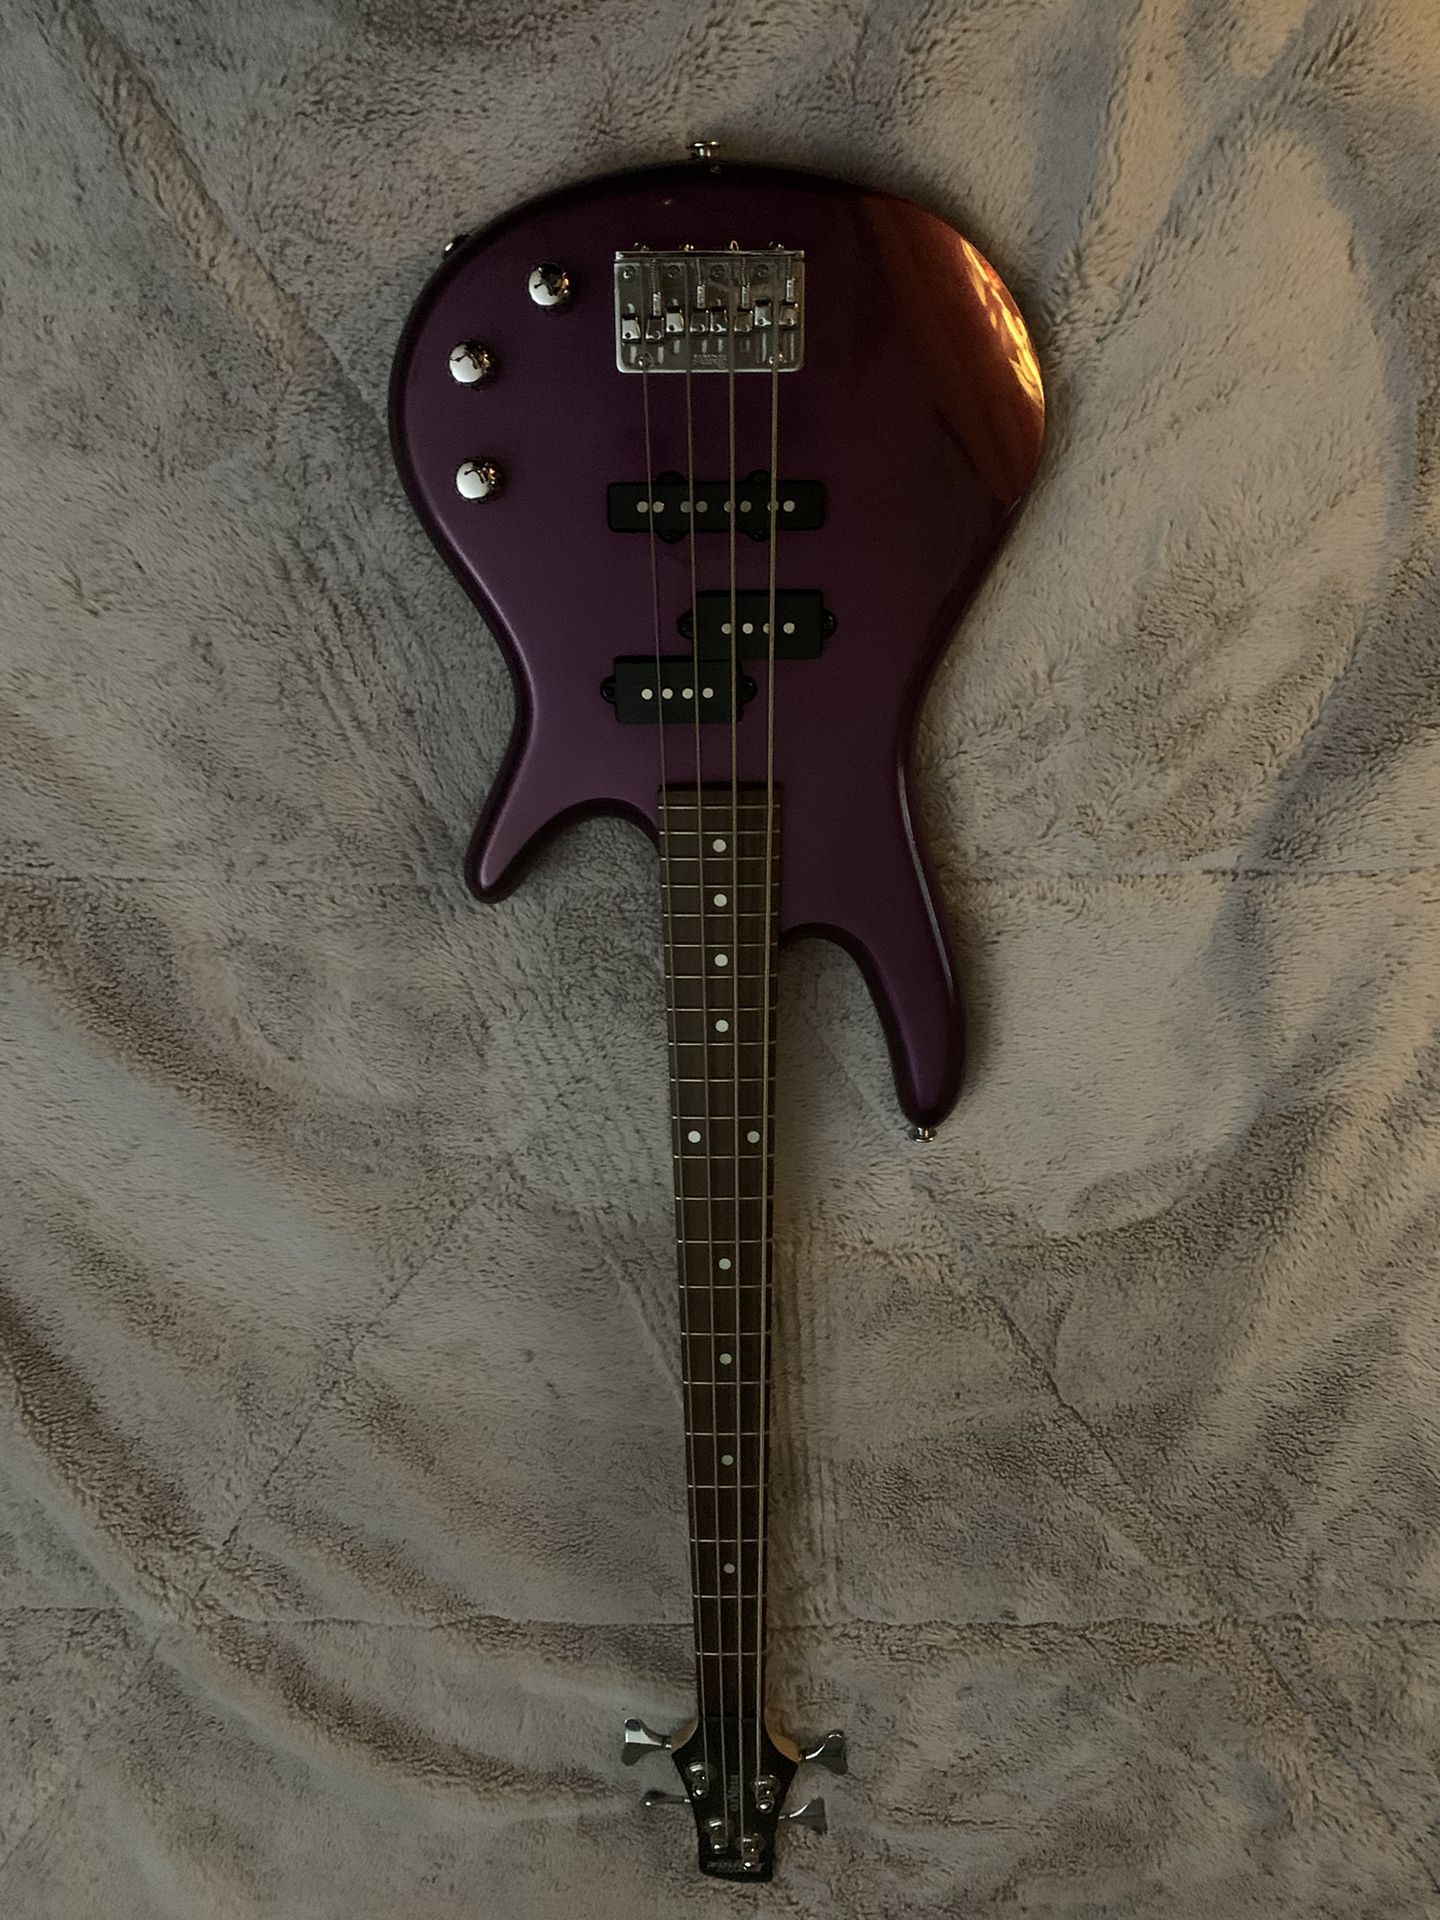 Ibanez Electric Bass Guitar